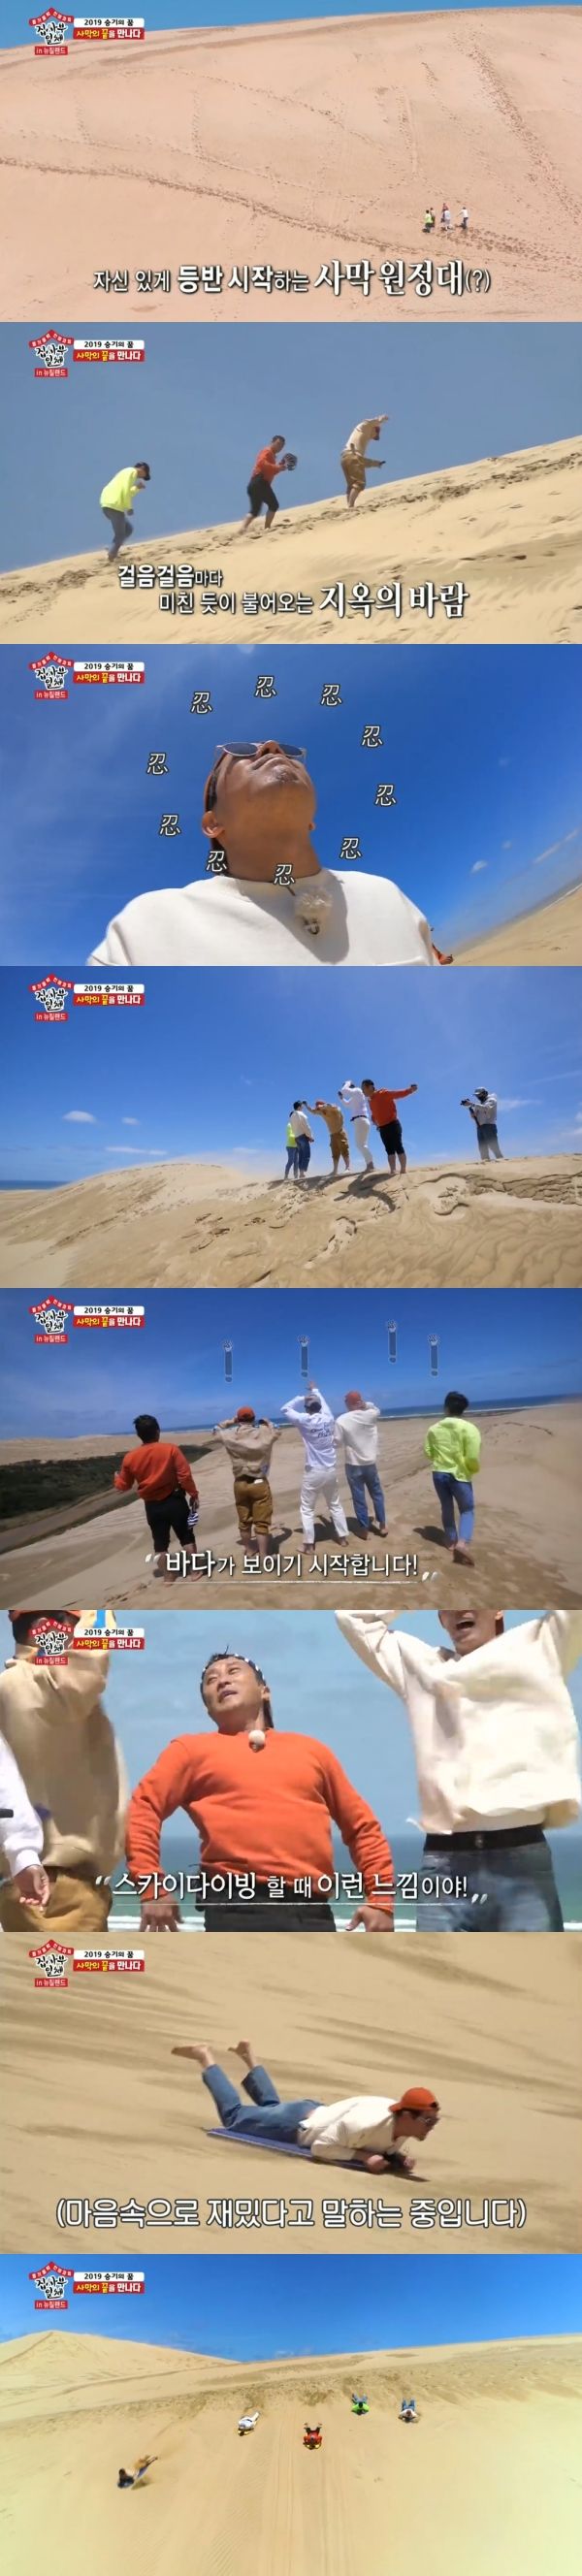 Members top Model on desert climbOn SBS All The Butlers broadcast on the 22nd, Yang Se-hyung, Yook Sungjae, Lee Sang-yoon and Lee Seung-gi who visited New Zealand followed Master Kim Byung-man to top model in desert climbing.On the day of the show, Kim Byung-man said, Im watching All The Butlers. I made a promise on Mr. Son Ye-jins side.At the time, Lee Seung-gi said, Lets realize a week in the desert that can once again strengthen mentality instead of playing and eating vacation.Im trying to make sure that promise is kept, Kim Byung-man said.Lee Seung-gi cheered, while Yook Sungjae quipped, saying, That promise was only a win.The members followed Kim Byung-man to the desert crossing, Top Model; however, the members who met the urgent slope were quickly exhausted.I dont think going is going, said Yook Sungjae, while Lee Seung-gi added, Im going to get a rat on my calf wrong, the sergeant will be 65 to 70 degrees.Kim Byung-man also said, I introduced it here for nothing. I made a mistake because I joined the other peoples goal.The production team also expressed concern about how to do it in strong sand.Lee Seung-gi and Kim Byung-man each complained of difficulties, saying, The sand is more harsh than I thought, and the sand hits my cheek.The members who arrived at the top of the strong winds looked down at the South Pacific and expressed their admiration. Kim Byung-man explained, The wind made this; the other side is more inclined.Lee Seung-gi added: This is the deserts 2018 Indian dust storms, beautiful, Masters amazing.Kim Byung-man laughed brightly, saying, Sky diving is this feeling.Kim Byung-man and his members, who succeeded in climbing the desert on the day, enjoyed the joy of going down the sandboard.